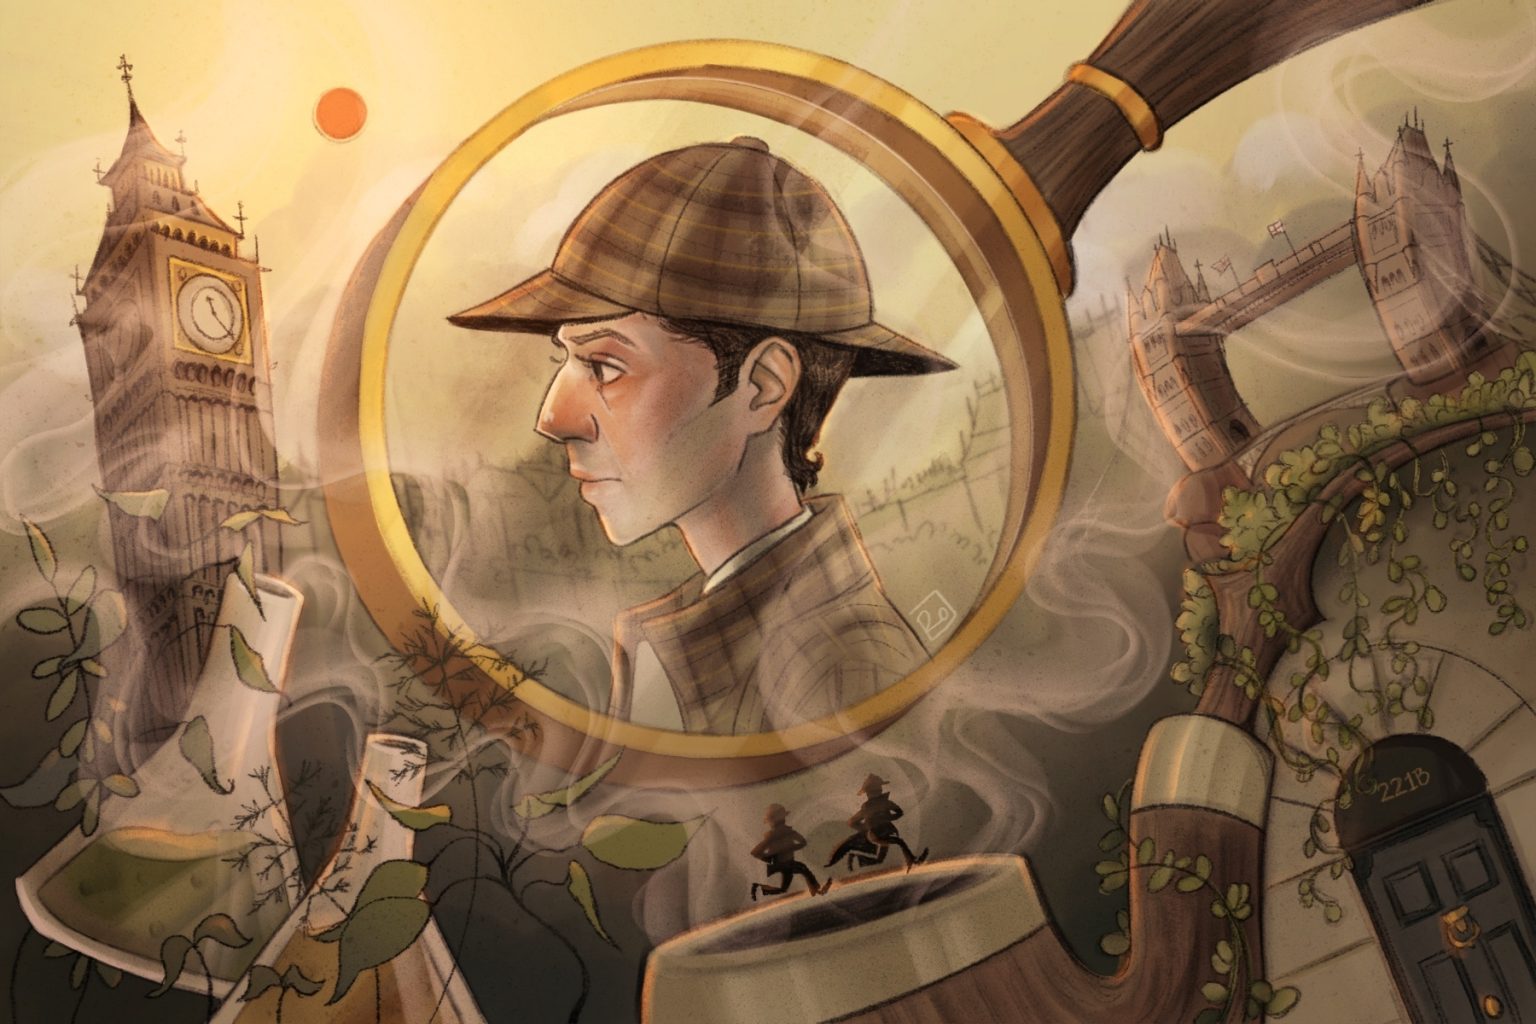 Sherlock Holmes Lives On as His Final 10 Stories Approach Public Domain